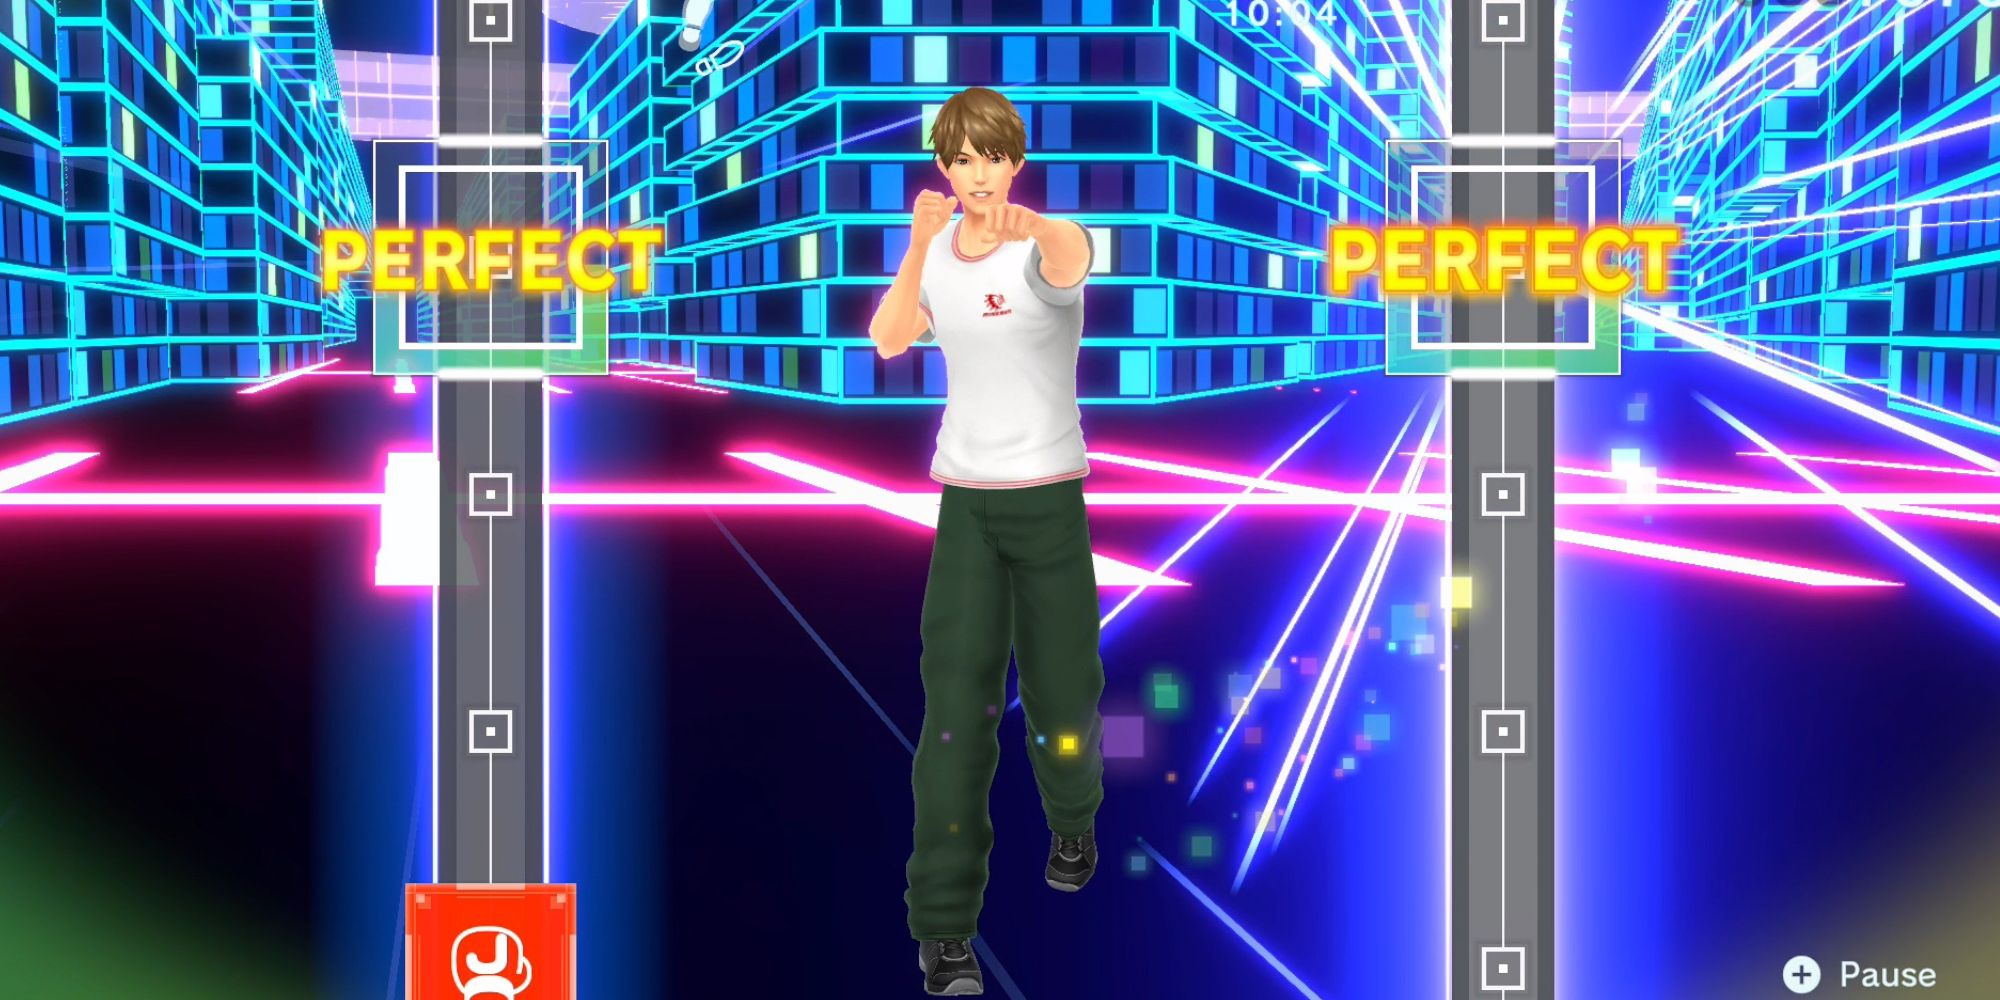 Fitness Boxing avatar doing boxing moves alongside indicators that say perfect